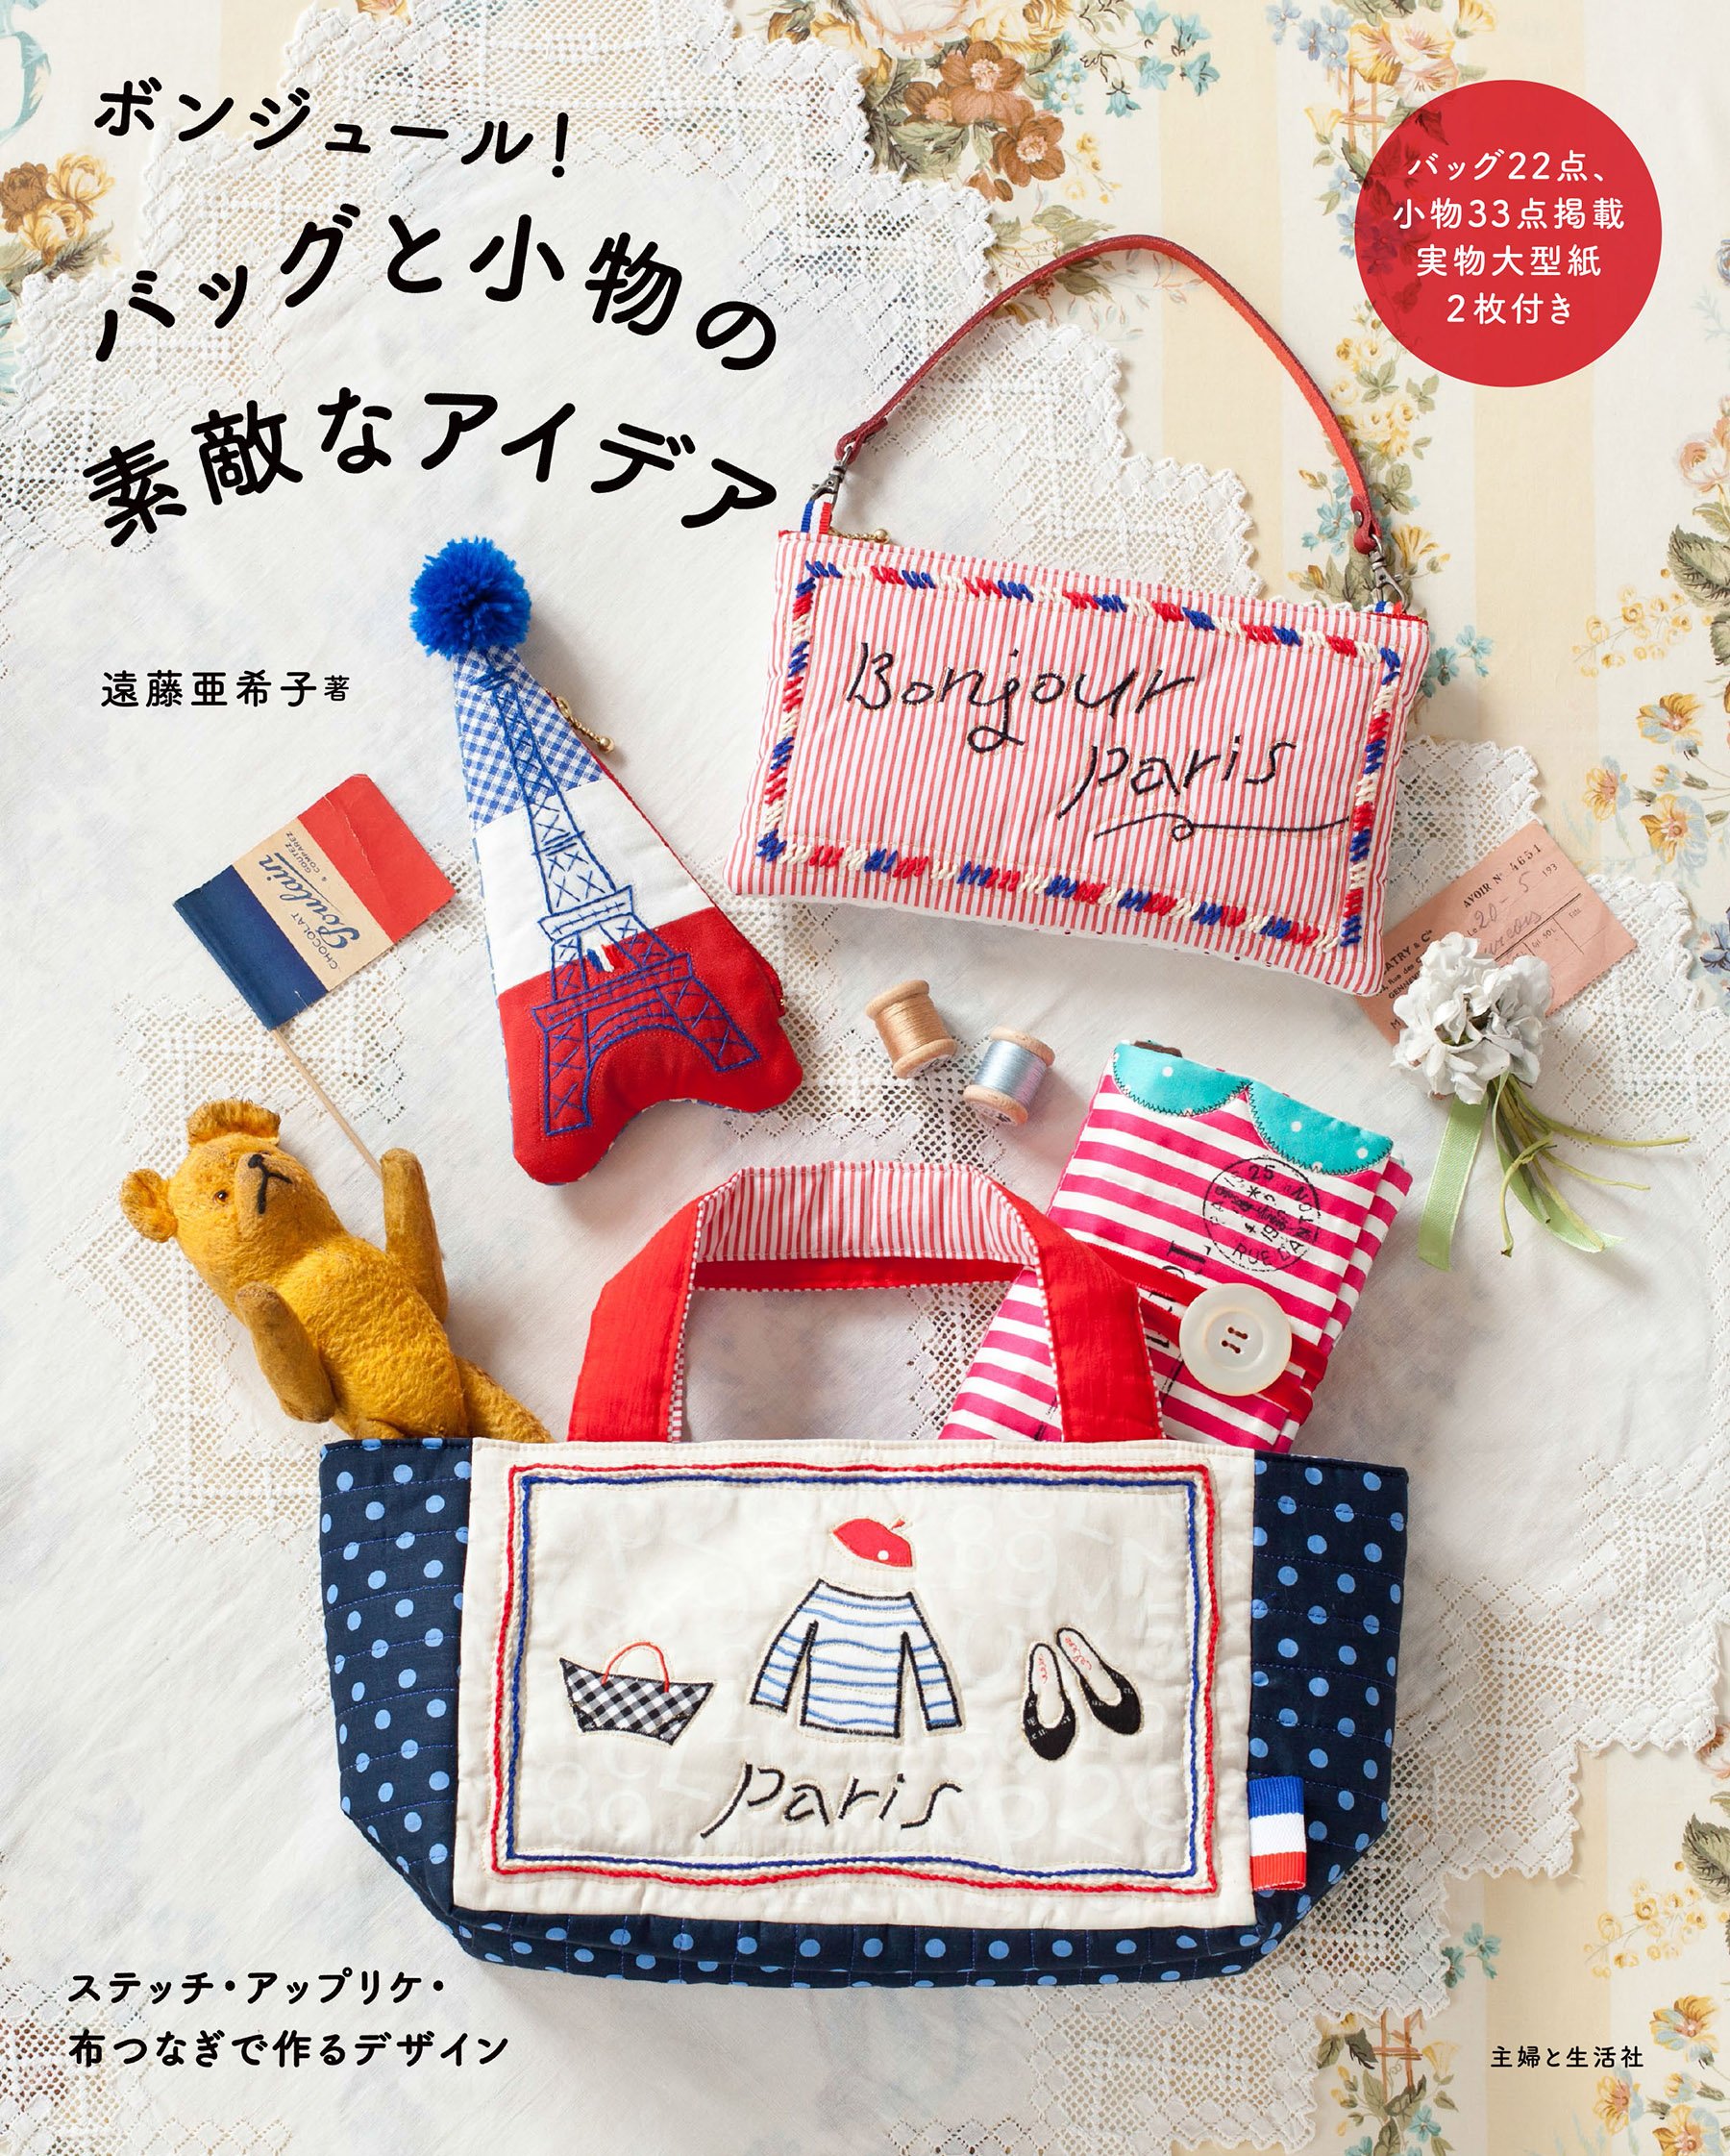 Bonjour! Nice idea of bags and accessories